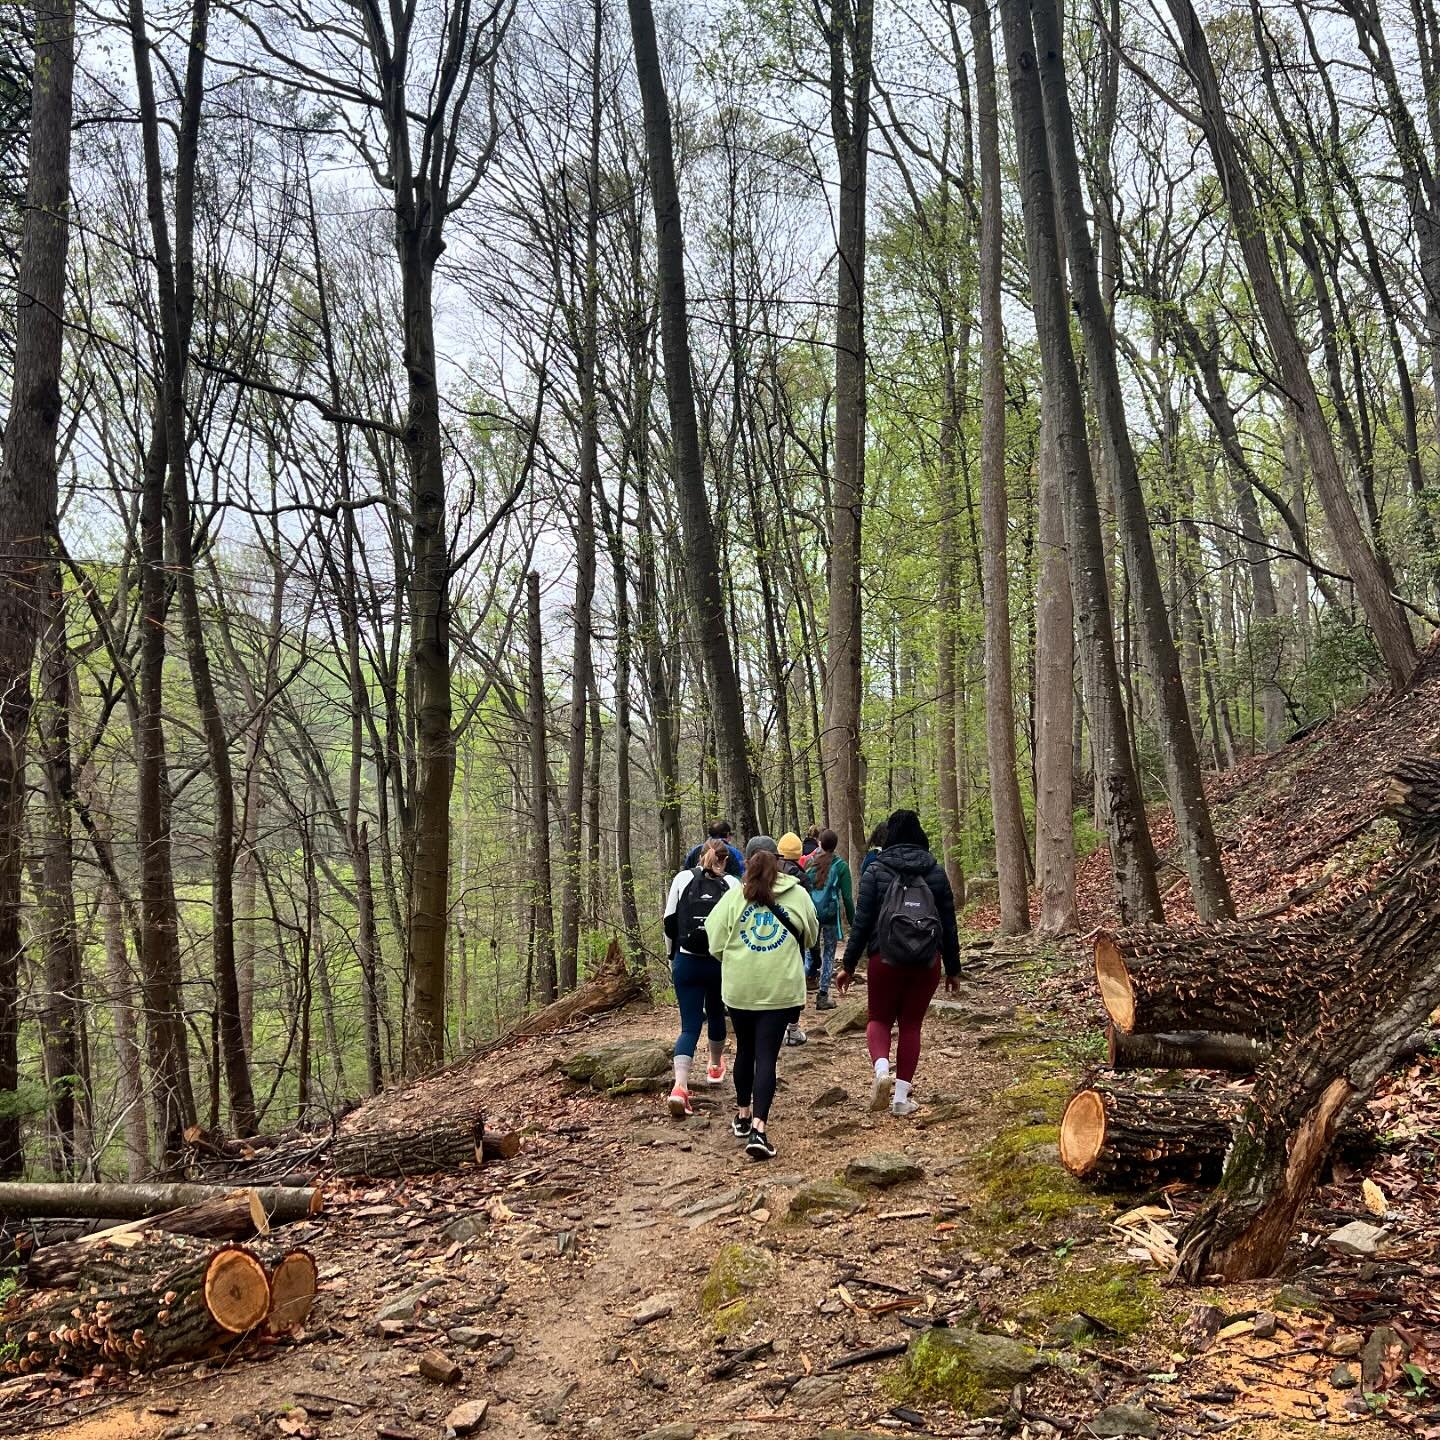 Beautiful &amp; peaceful hike along the Wissahickon today! ☀️🍃

We stumbled upon lots of babbling brooks, tulip tree leaves, cardinals and even a wedding ceremony at Valley Green! 

Thank you to everyone who joined in- it was so nice to seeing new a